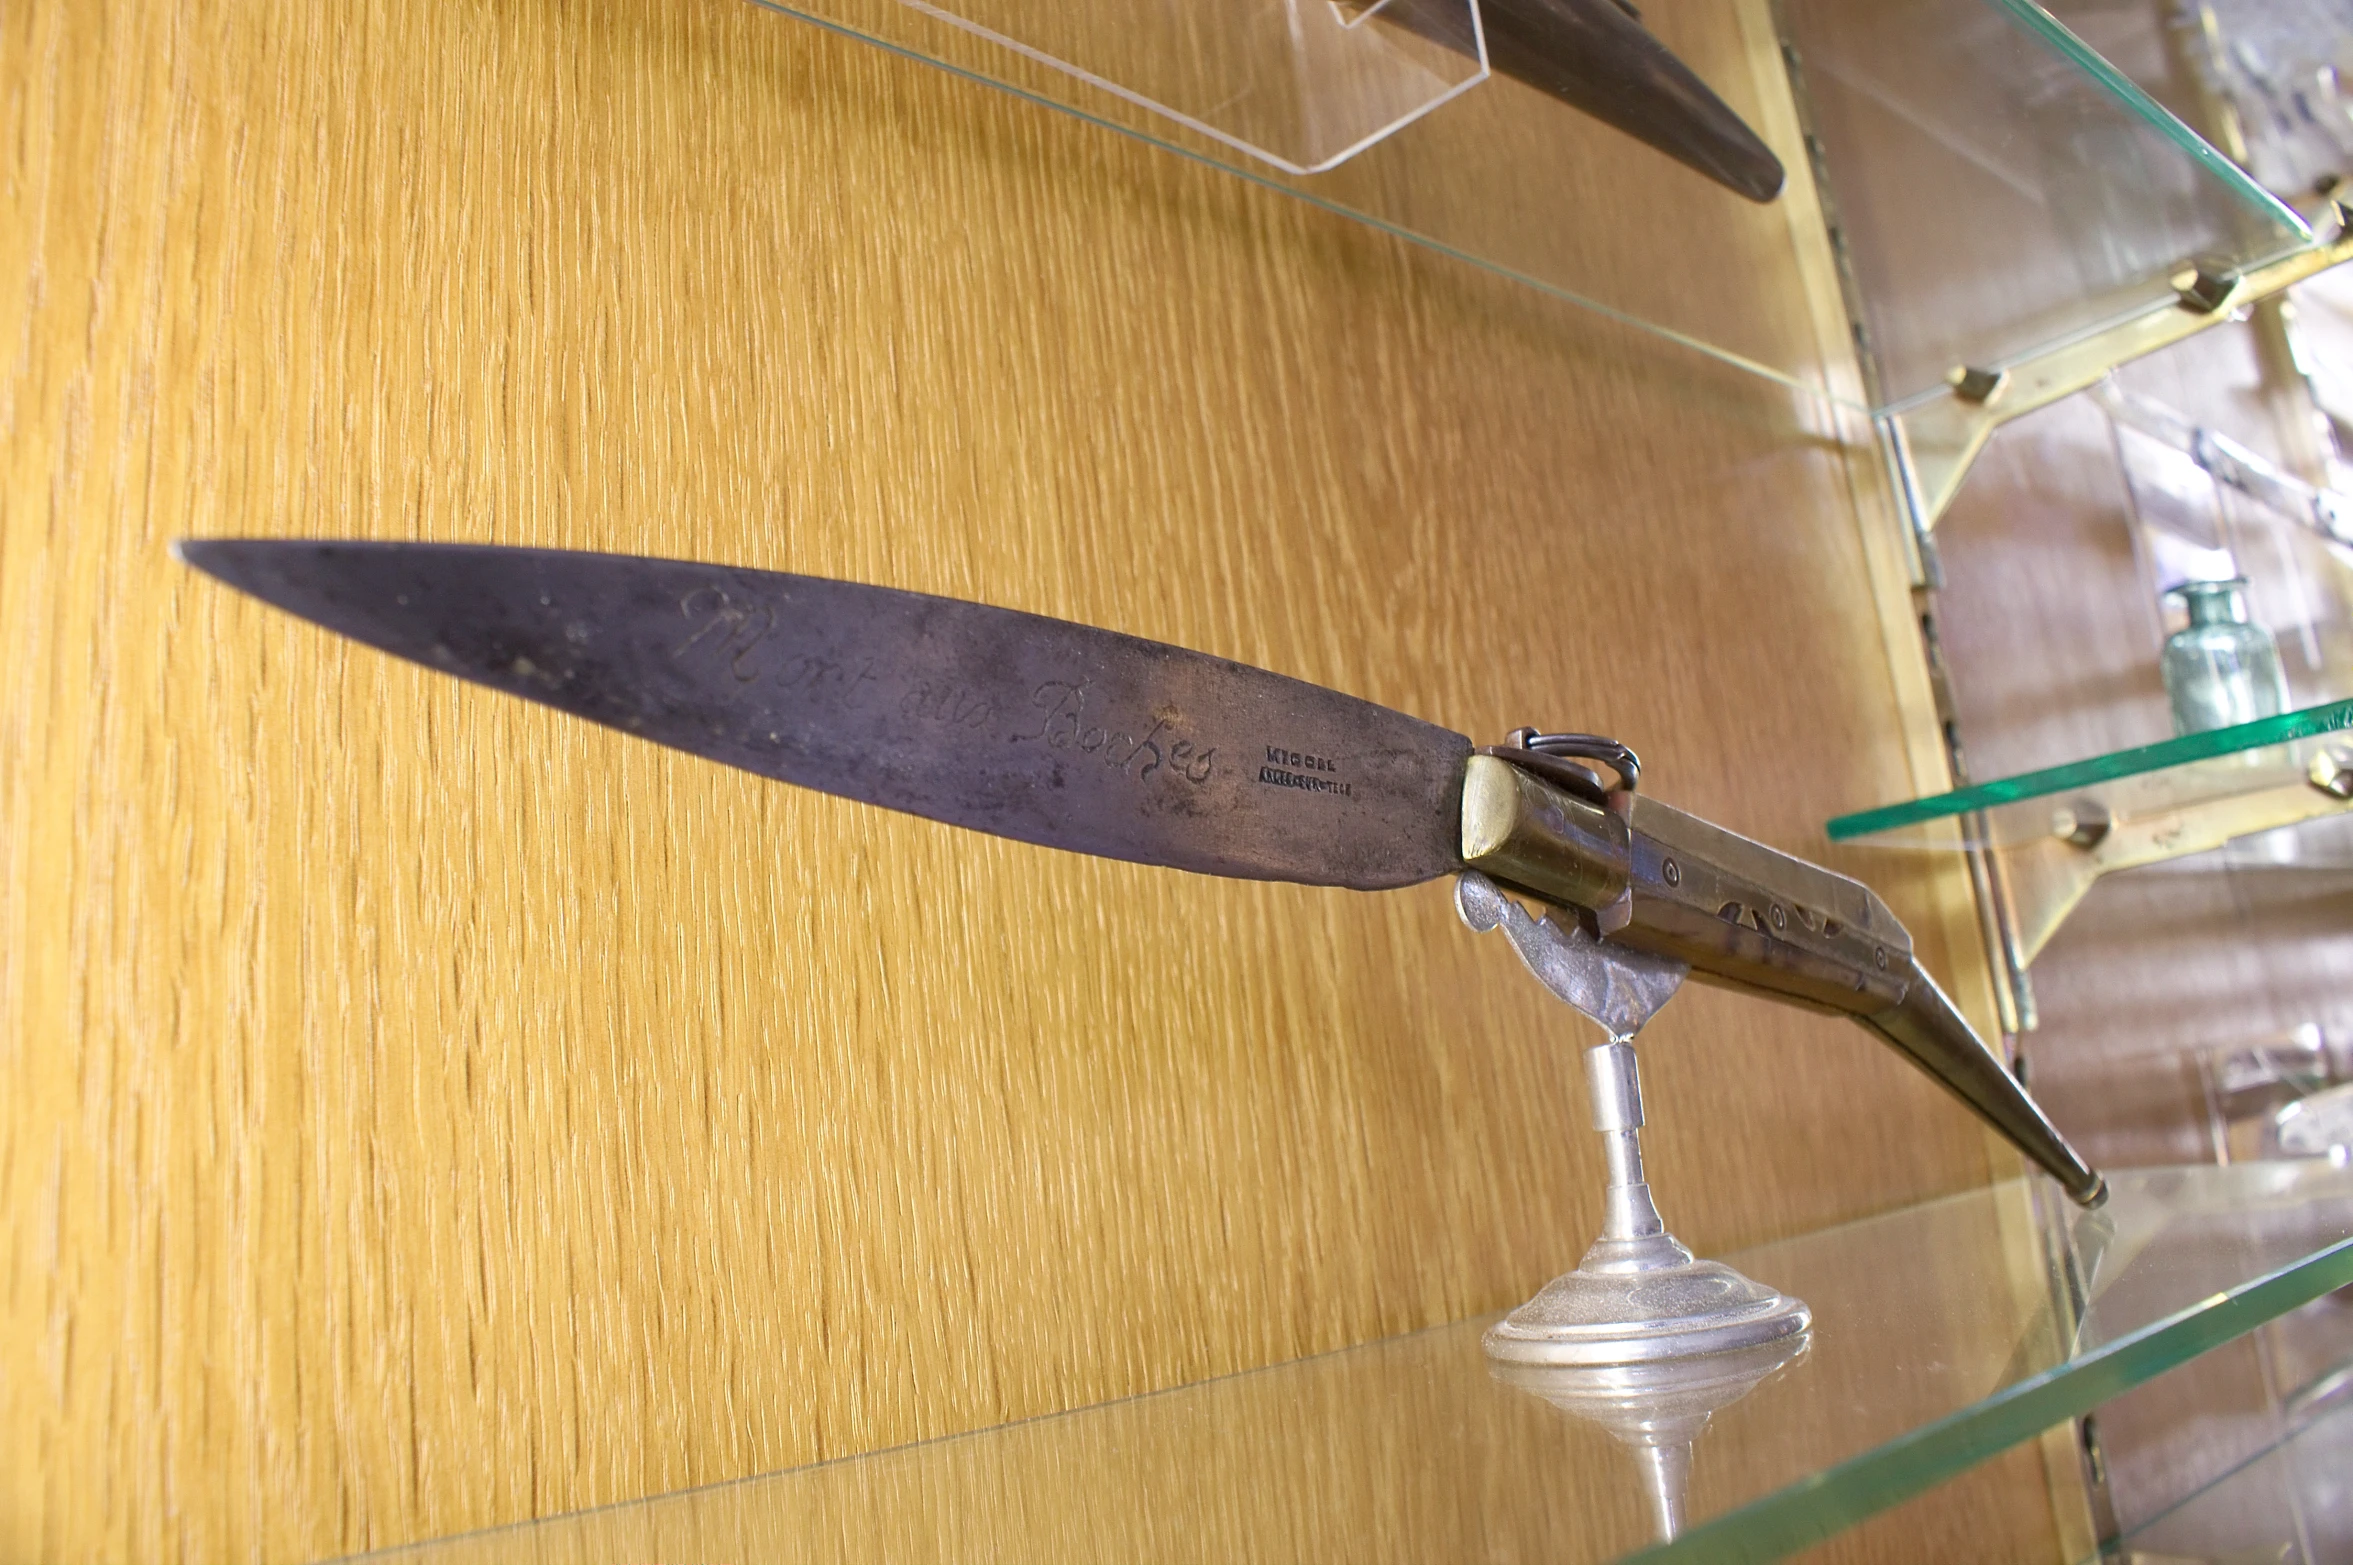 a knife hanging on a wooden table near a glass shelf